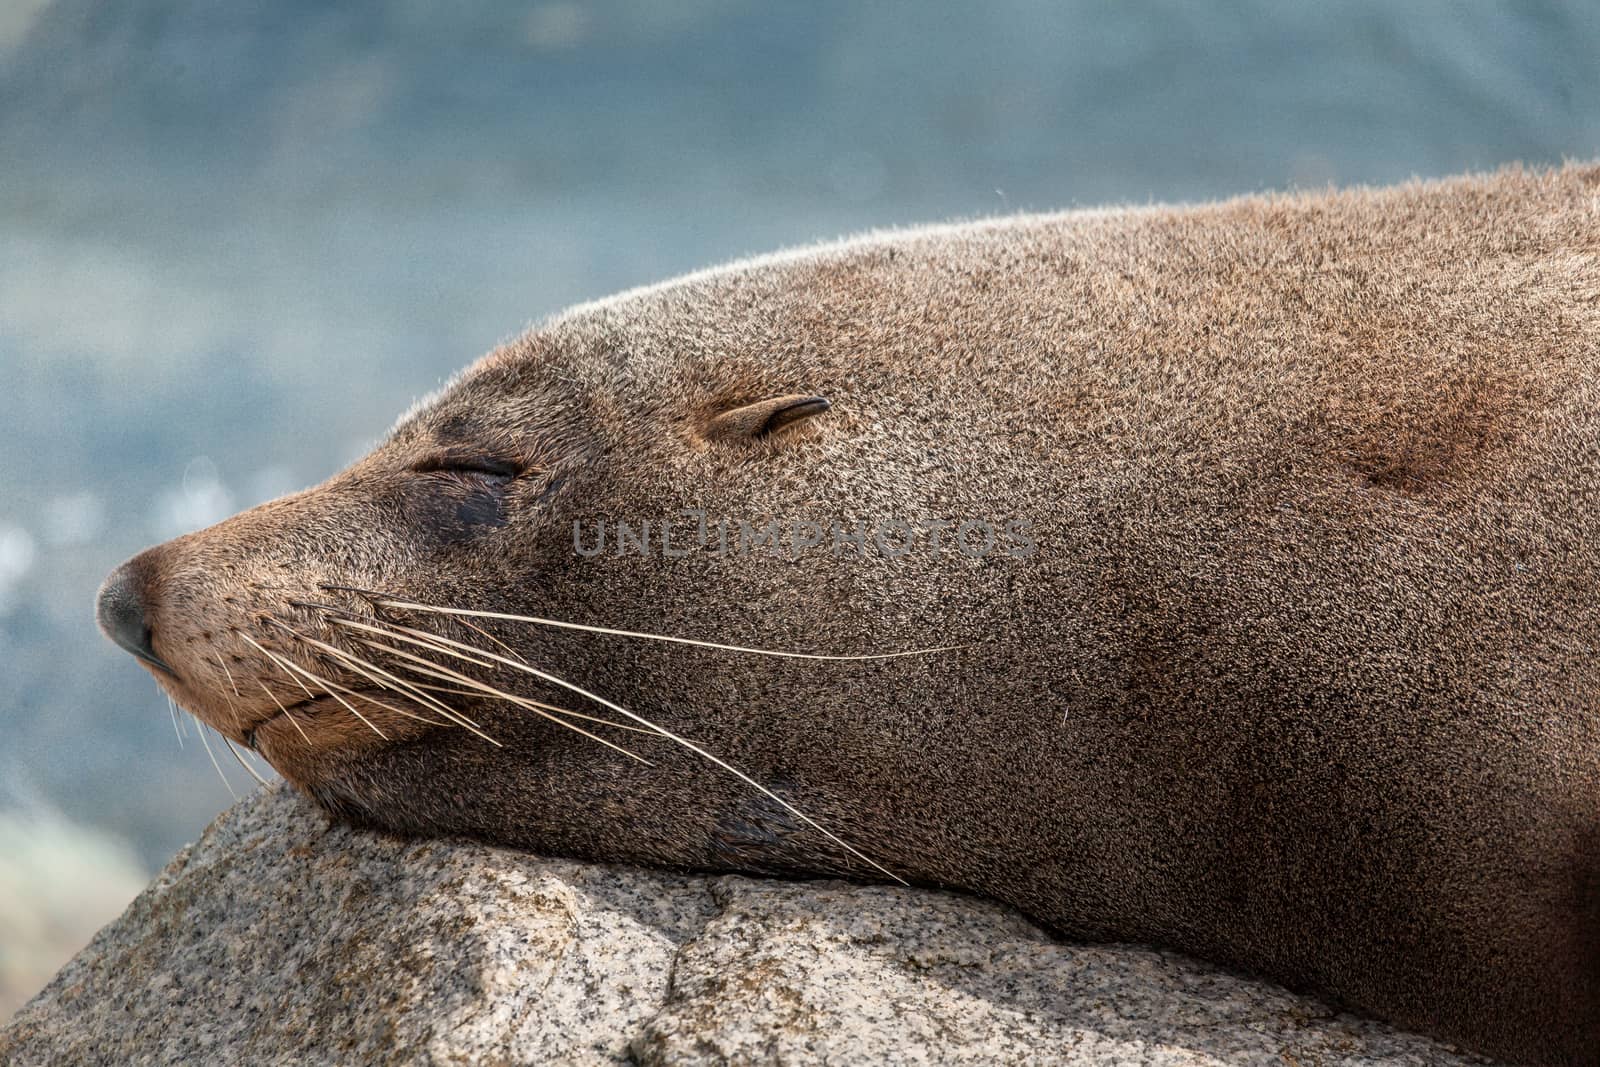 Sleeping seal takes a rest on a rock in Narooma after a big feed and a playful swim.